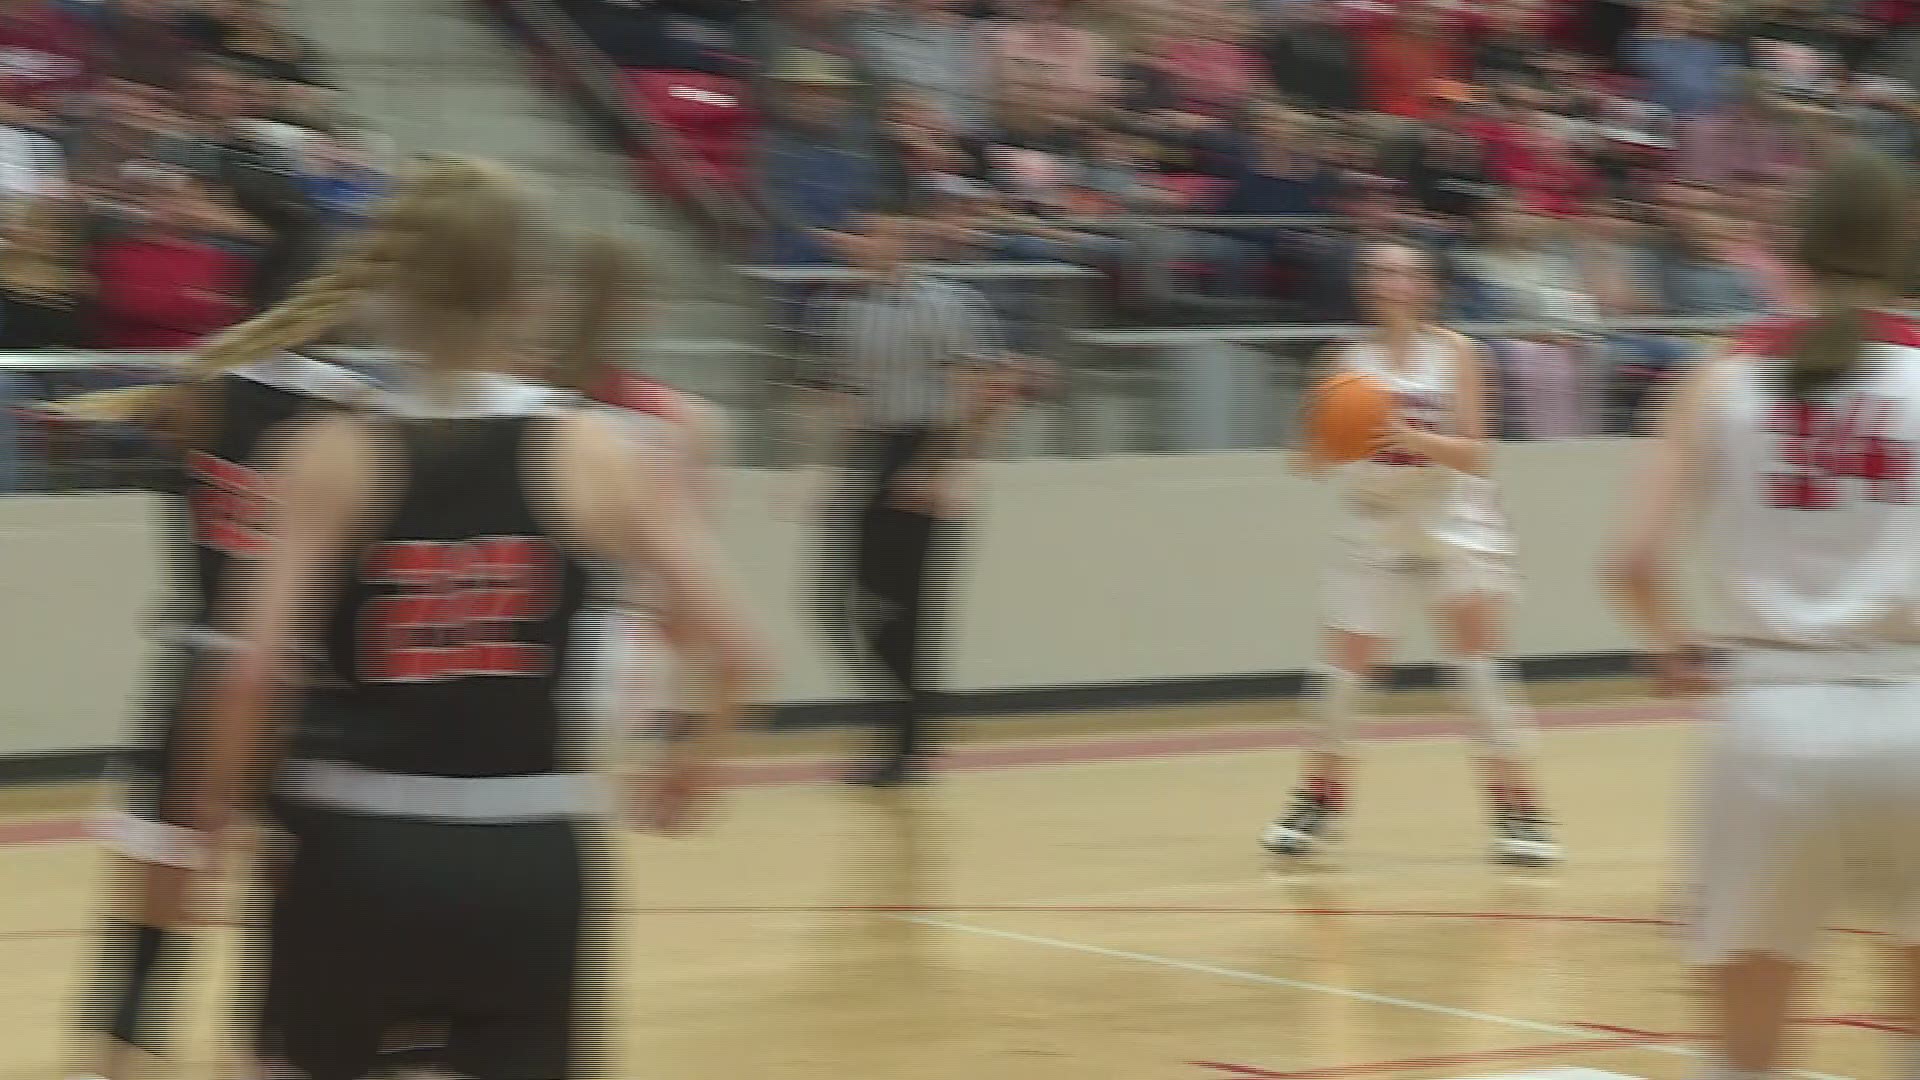 The Farmington Lady Cardinals punched their ticket to the 4A state title game with a win over Batesville